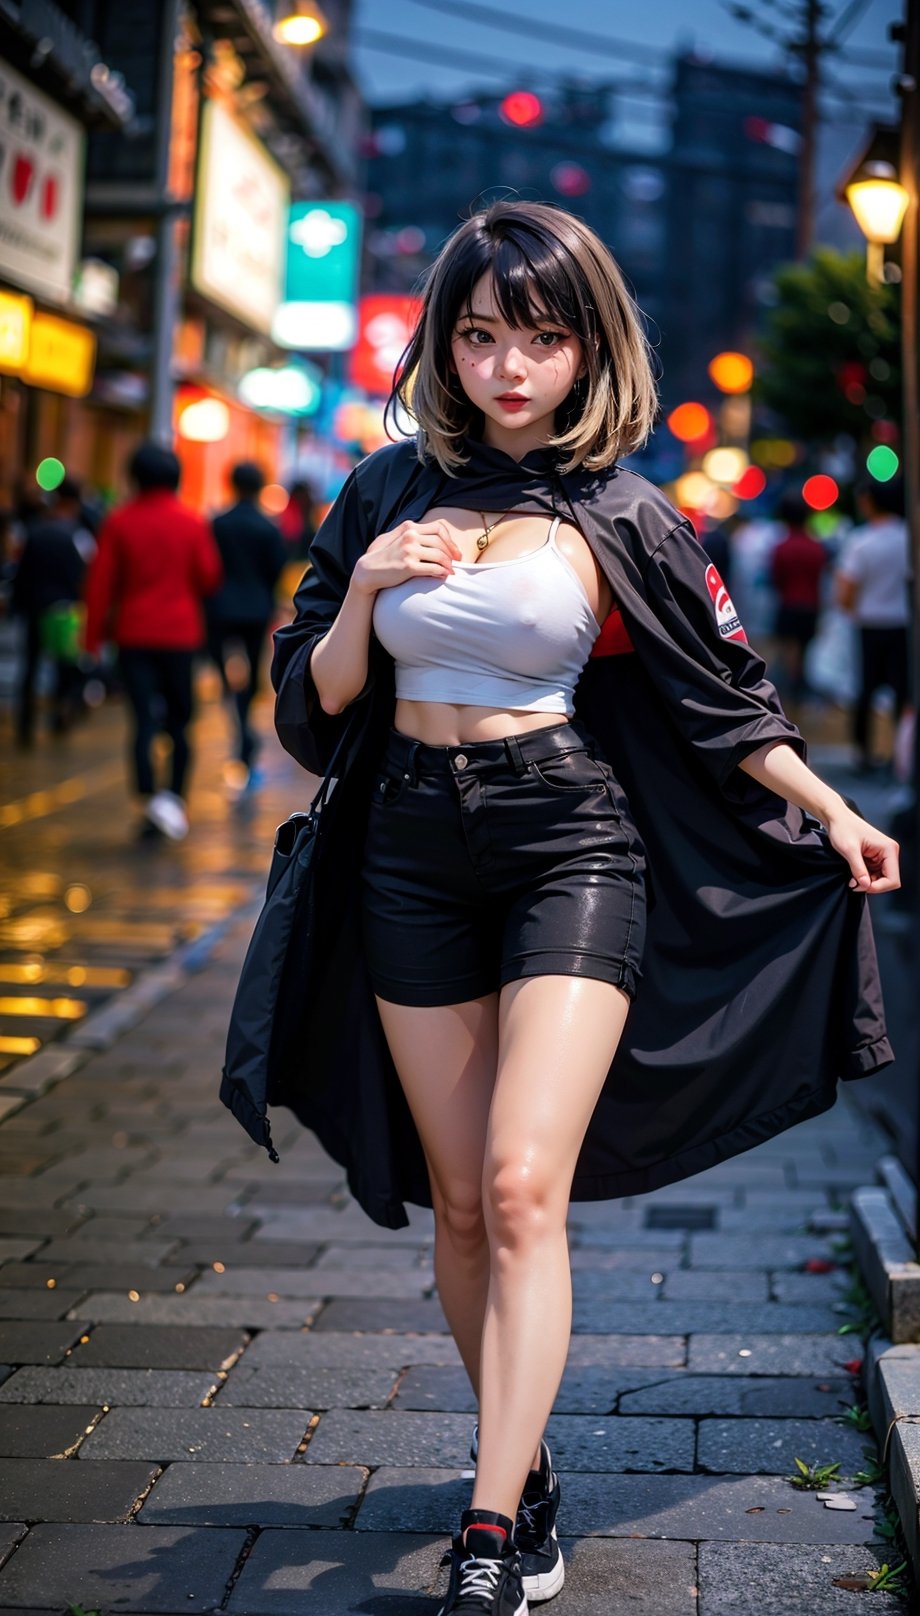 Exhibitionisme, A Pretty girl, 20 years old, her beautiful black eyes, no makeup, detailed face, cheek mole, wearing akatsuki cloak covered nude body, bare_legs, bare_breasts, curvy waist BREAK. Full body view, Walking to viewer, BREAK. At Tokyo's Street, blurred crowd men, BREAK. Blurred Background Tokyo's street At Night, BREAK. Spot lighting, BREAK. long distance shot, full body shot BREAK, Tempting, Exciting, Extremely realistic, super detailed, perfectly, proportional, UHD, 8k Resolution, masterpiece, RAW, depth of field BREAK.,sarahviloid